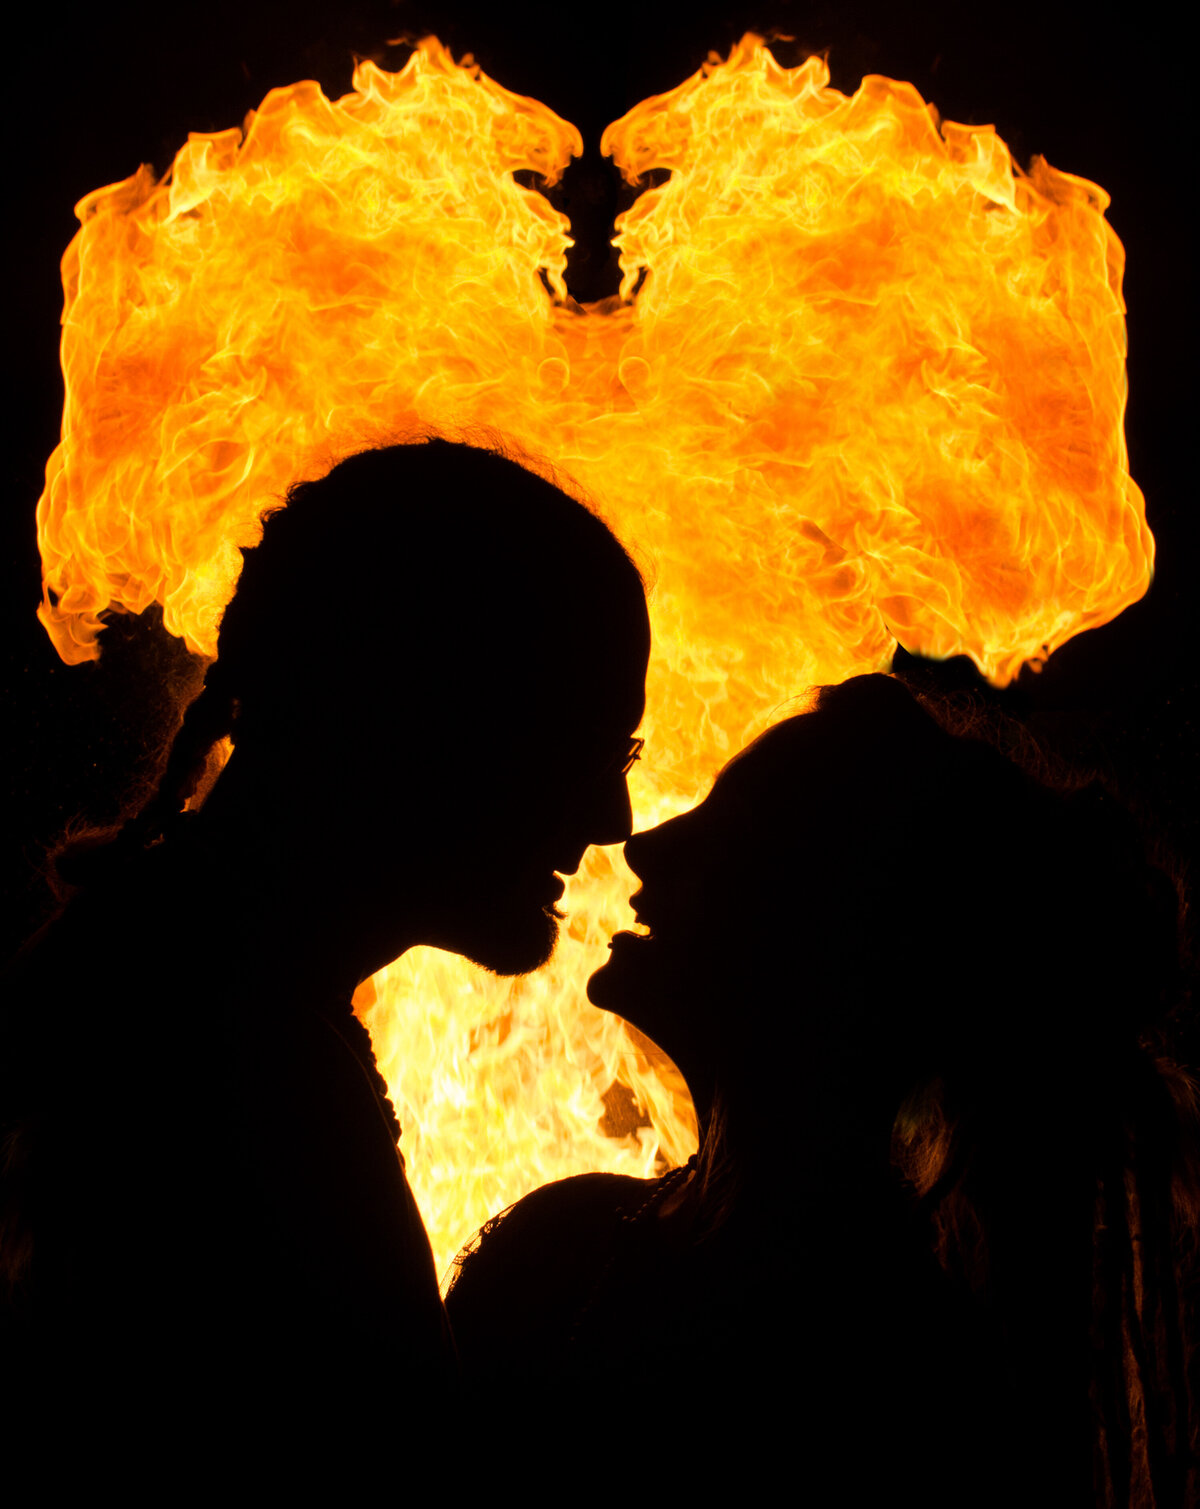 The silhouette of two people about to kiss with fire burning in the background.